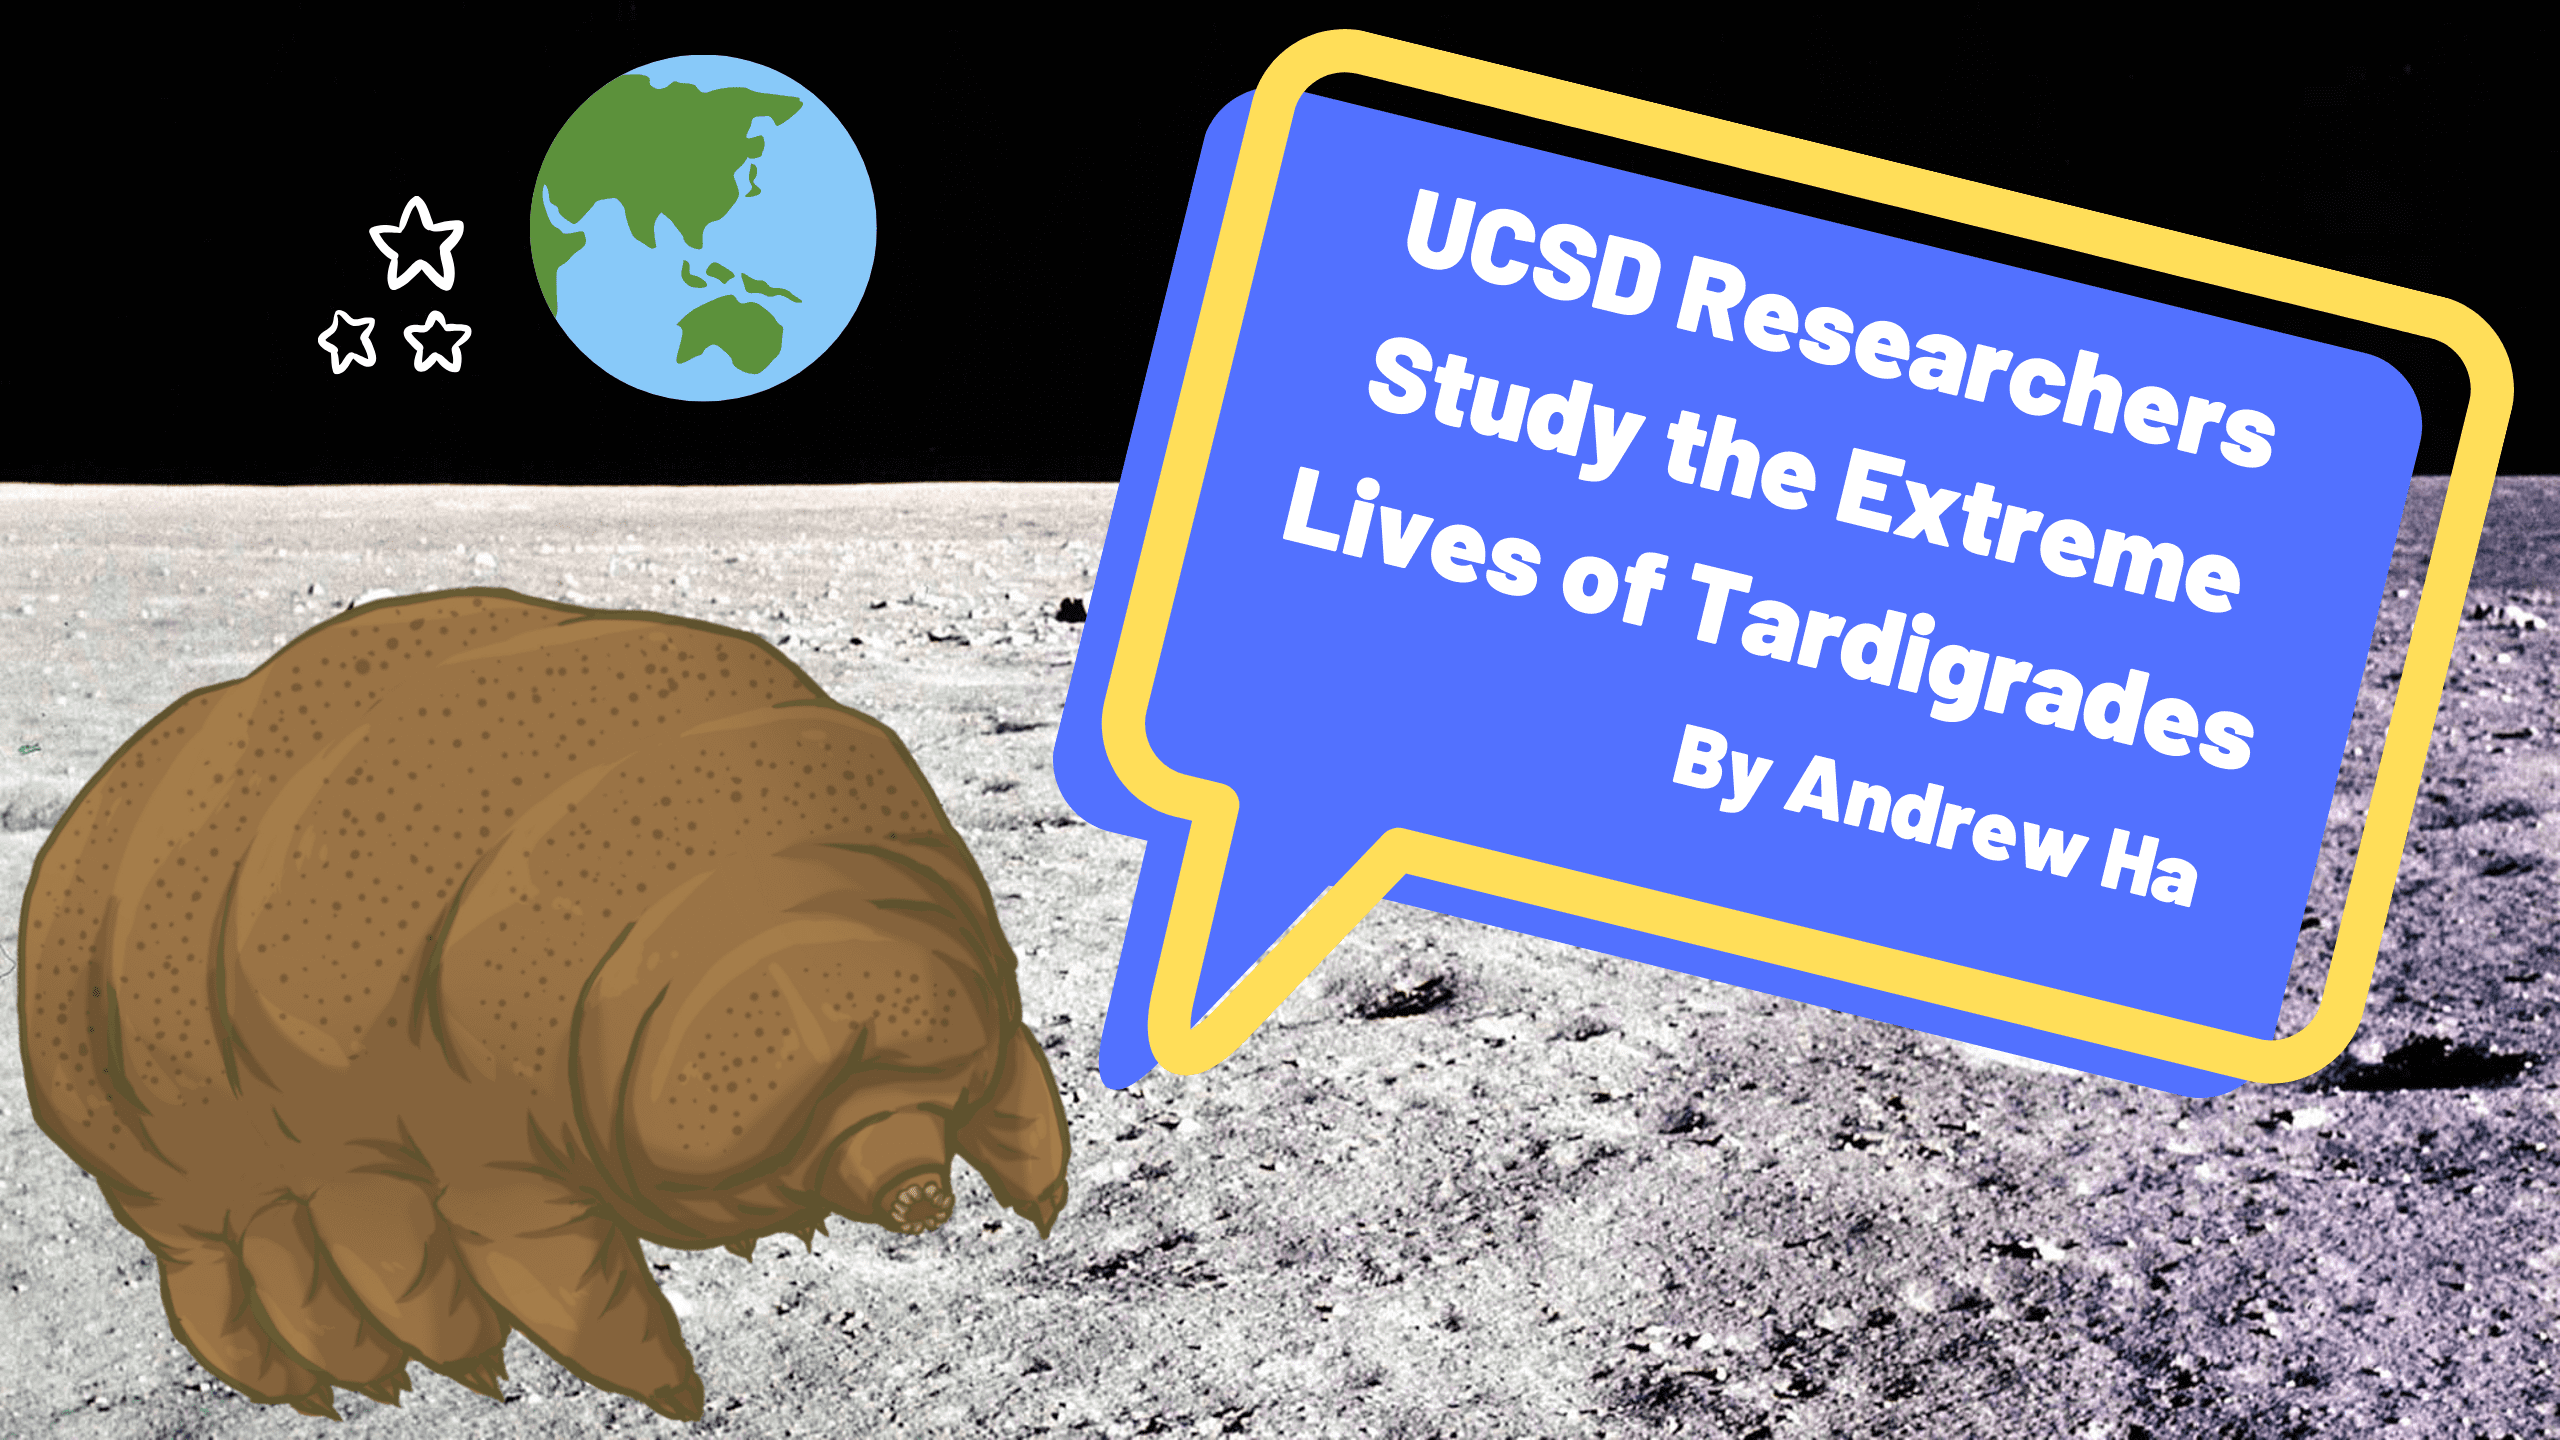 Researchers at UCSD Study the Extreme Lives of Tardigrades - The UCSD Guardian Online